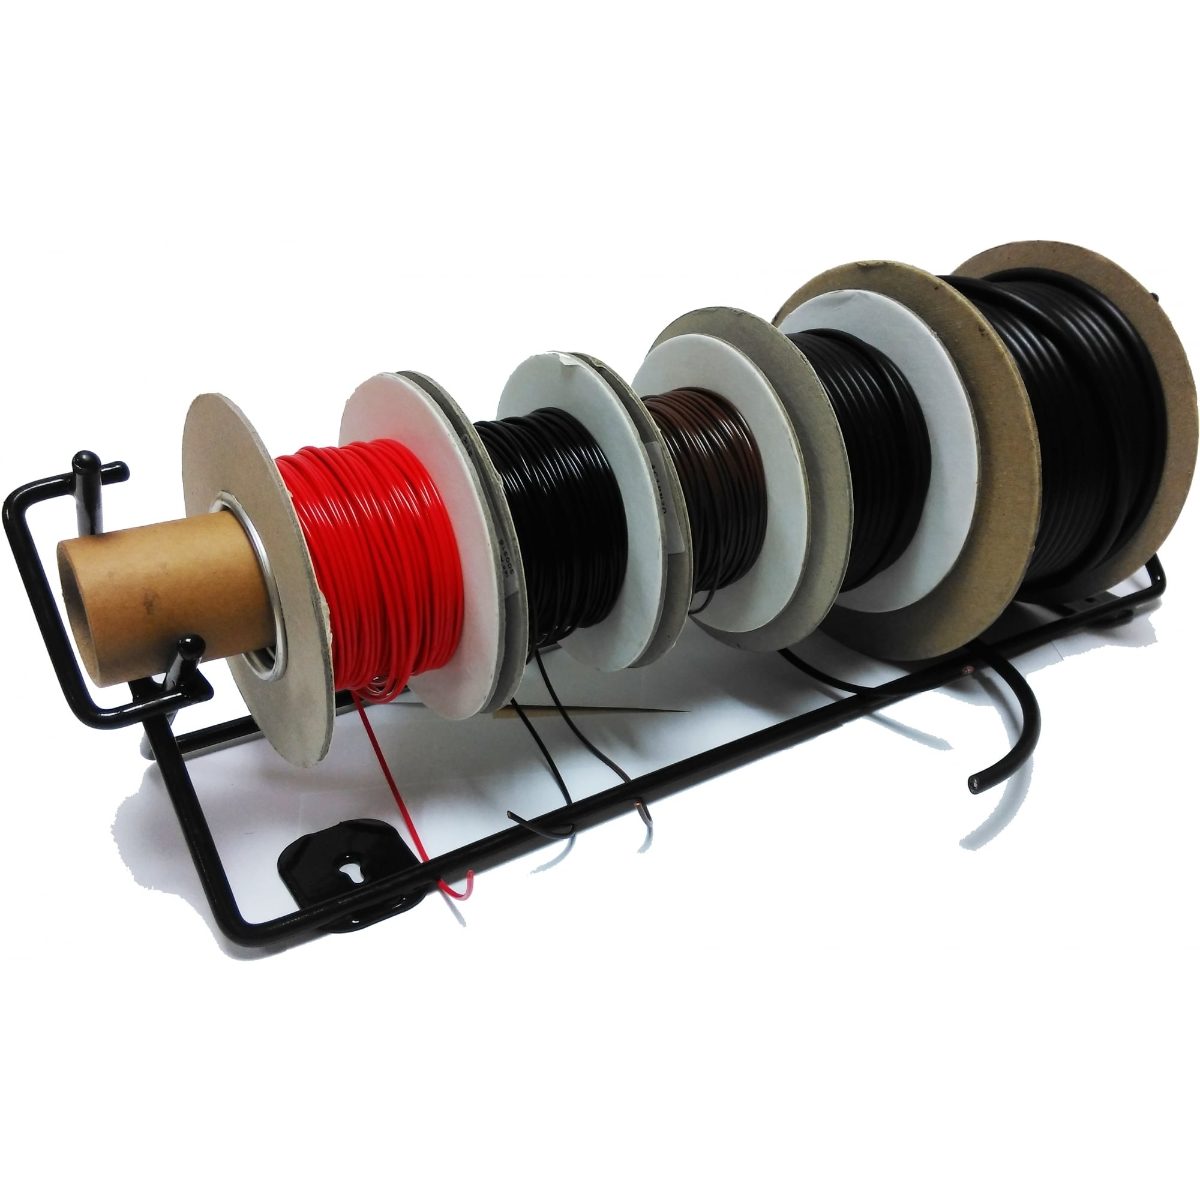 Cable Reel Holder & 5 Cable Reels - Wall Mountable Display